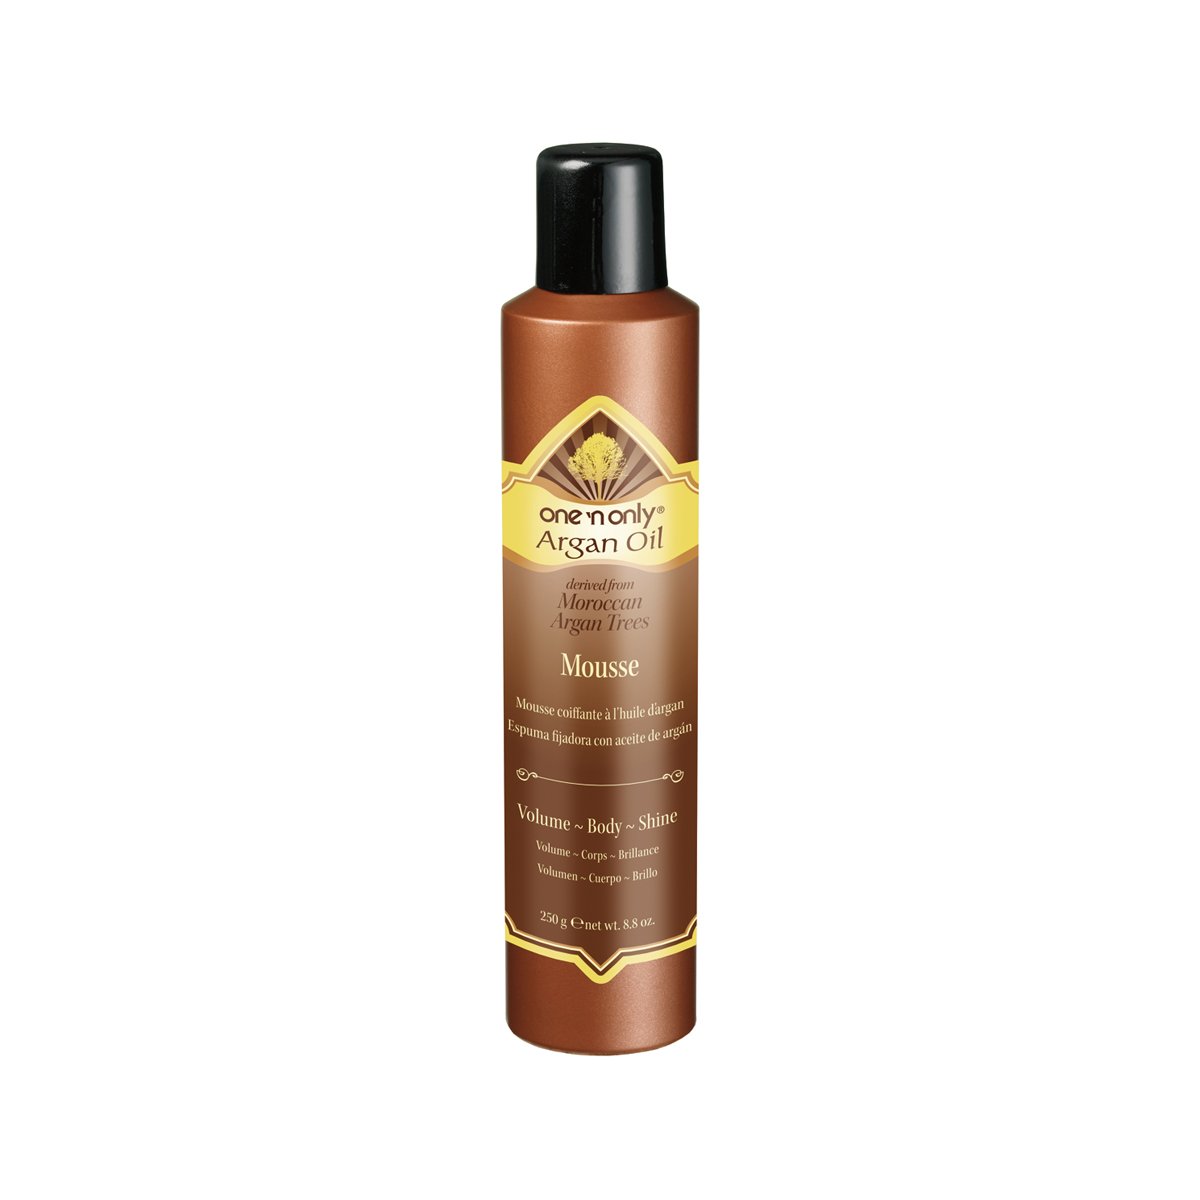 4th Ave Market: One N Only Argan Oil Mousse 8.8oz